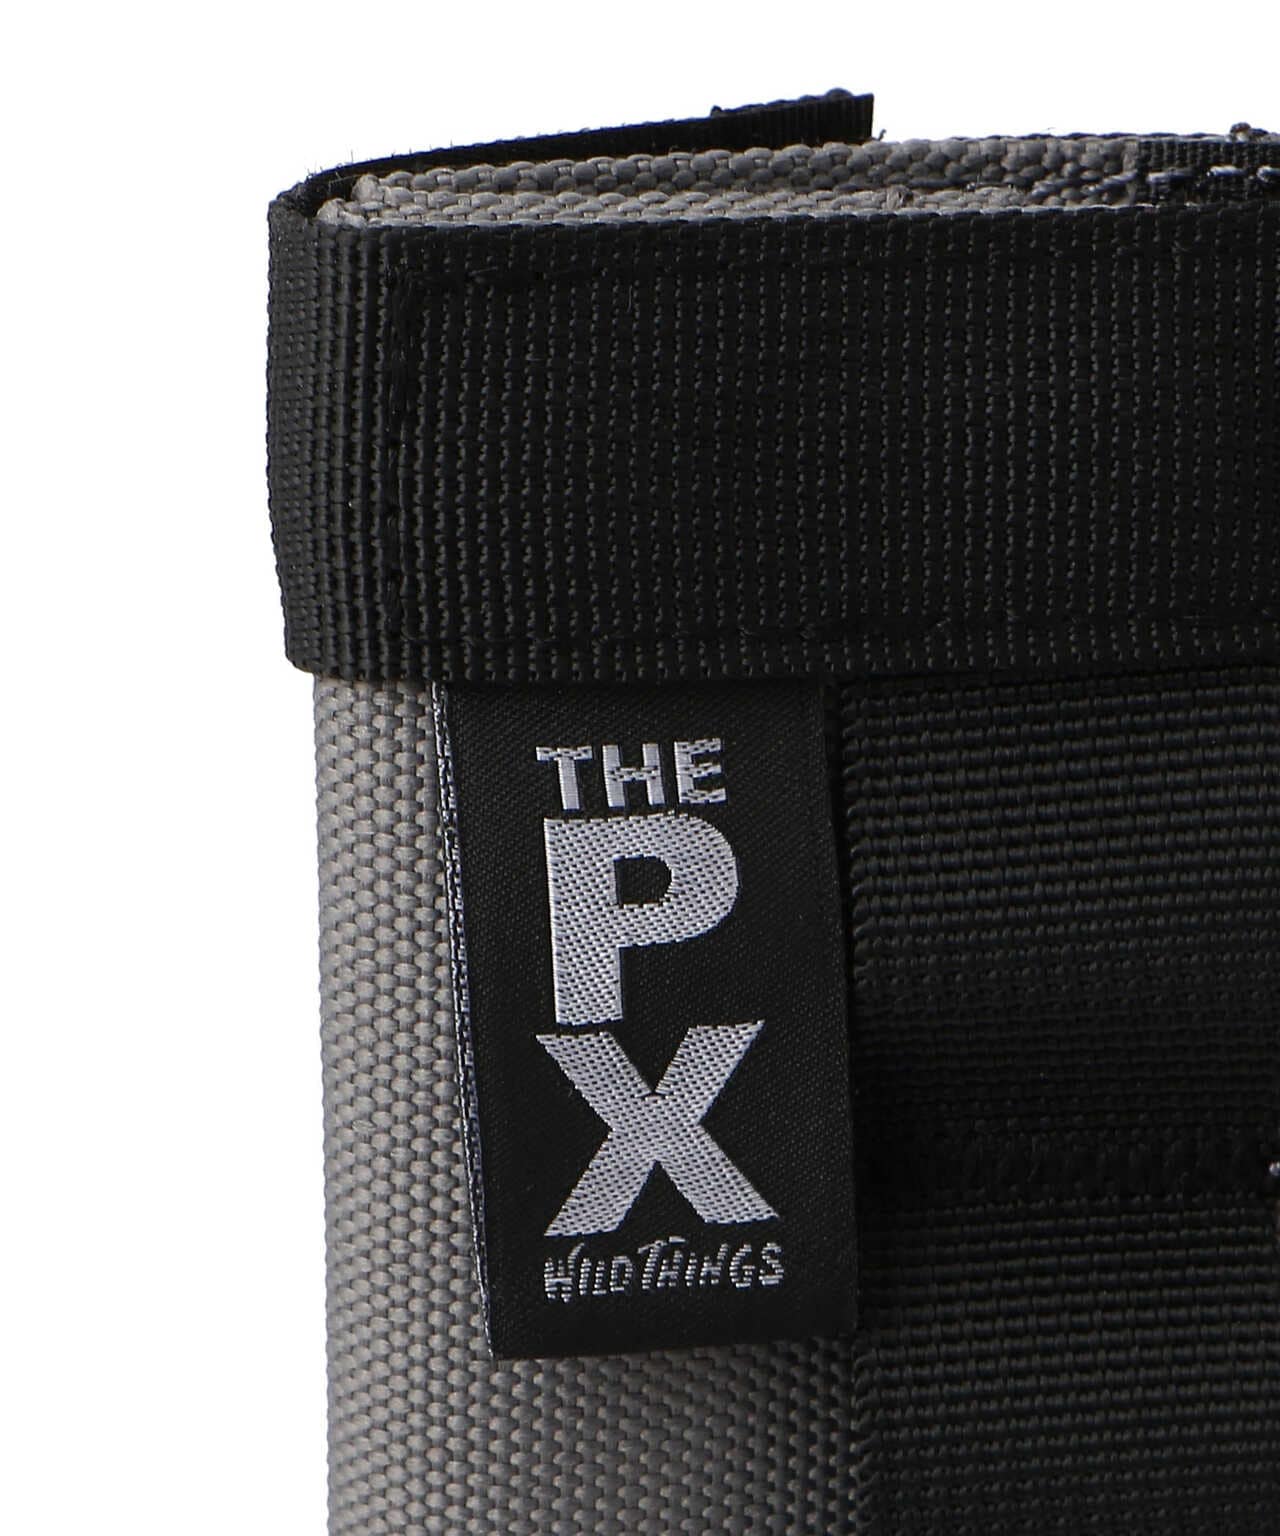 THE PX WILD THINGS/ザ・ピーエックスワイルドシングス　THE PX TISSUE CASE/ WPX220010